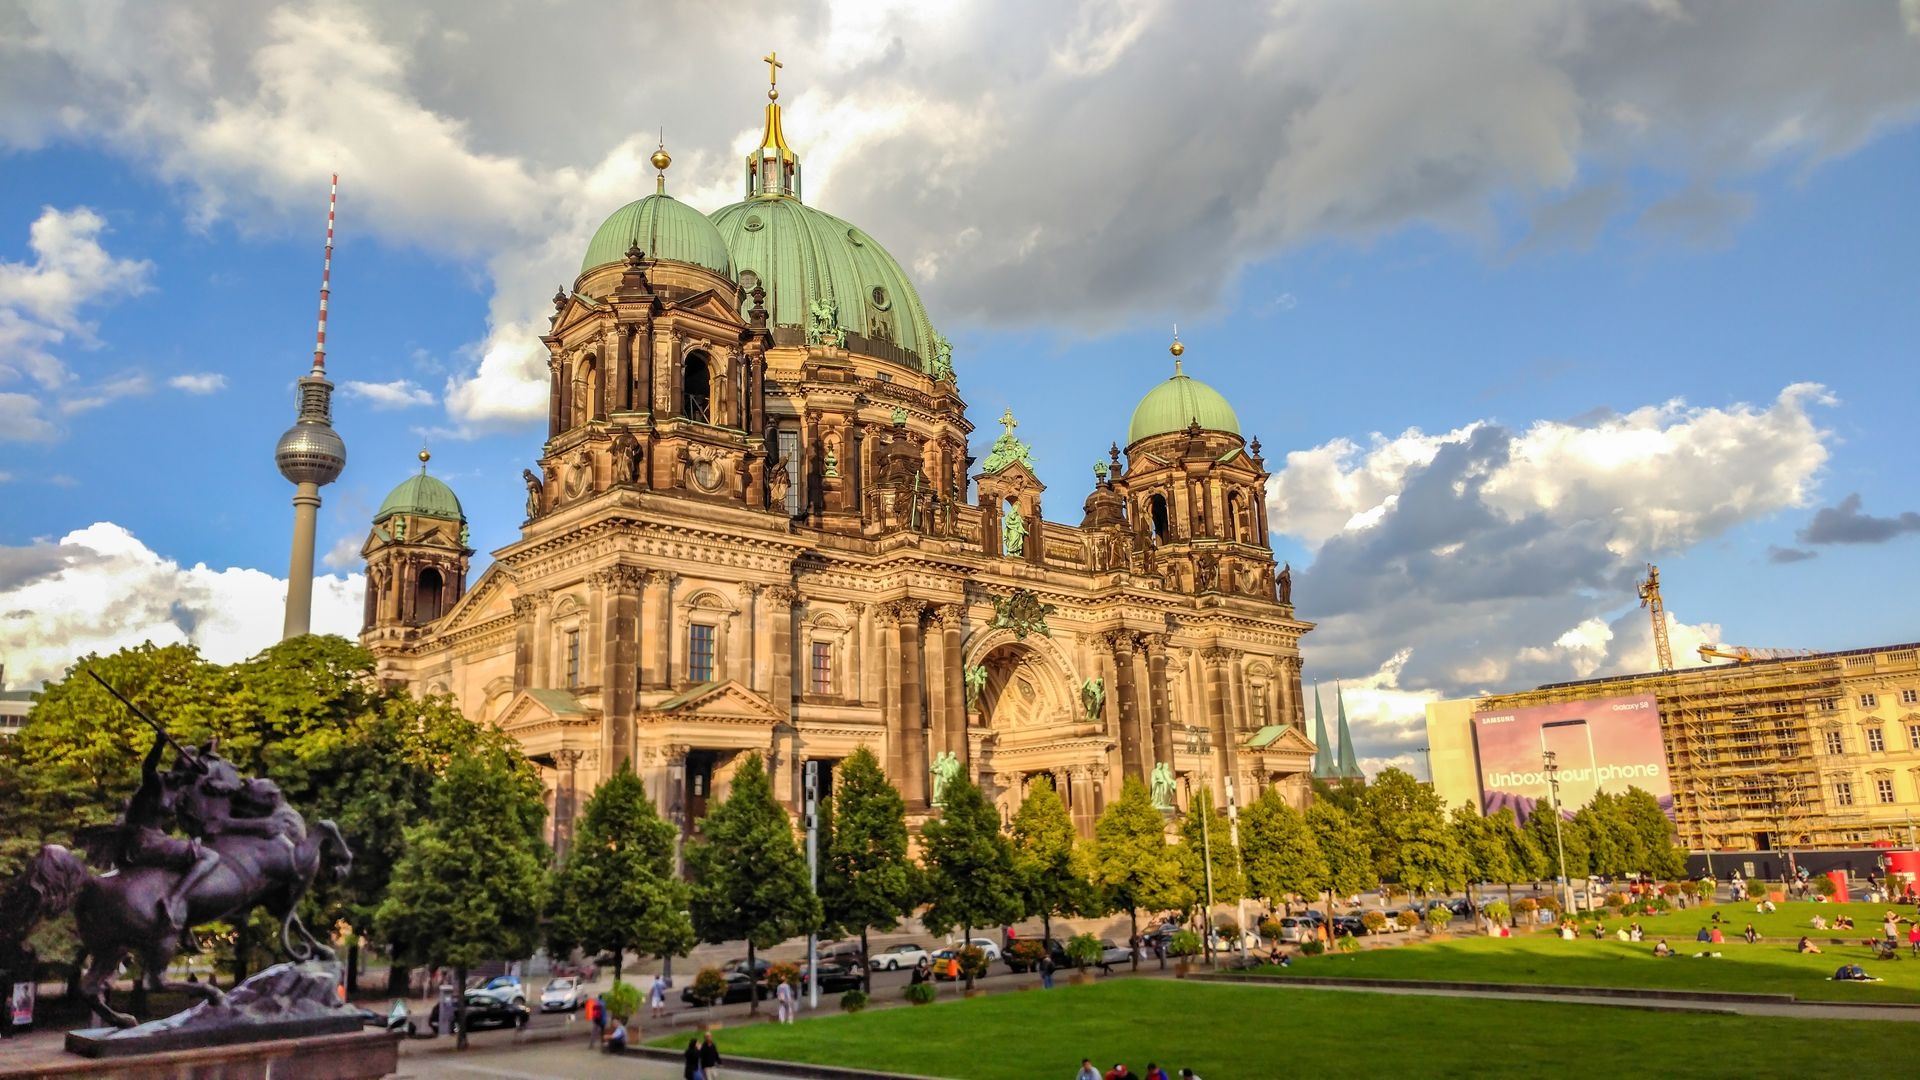 Berlin Cathedral, Awe-inspiring structure, Magnificent architecture, Iconic landmark, 1920x1080 Full HD Desktop